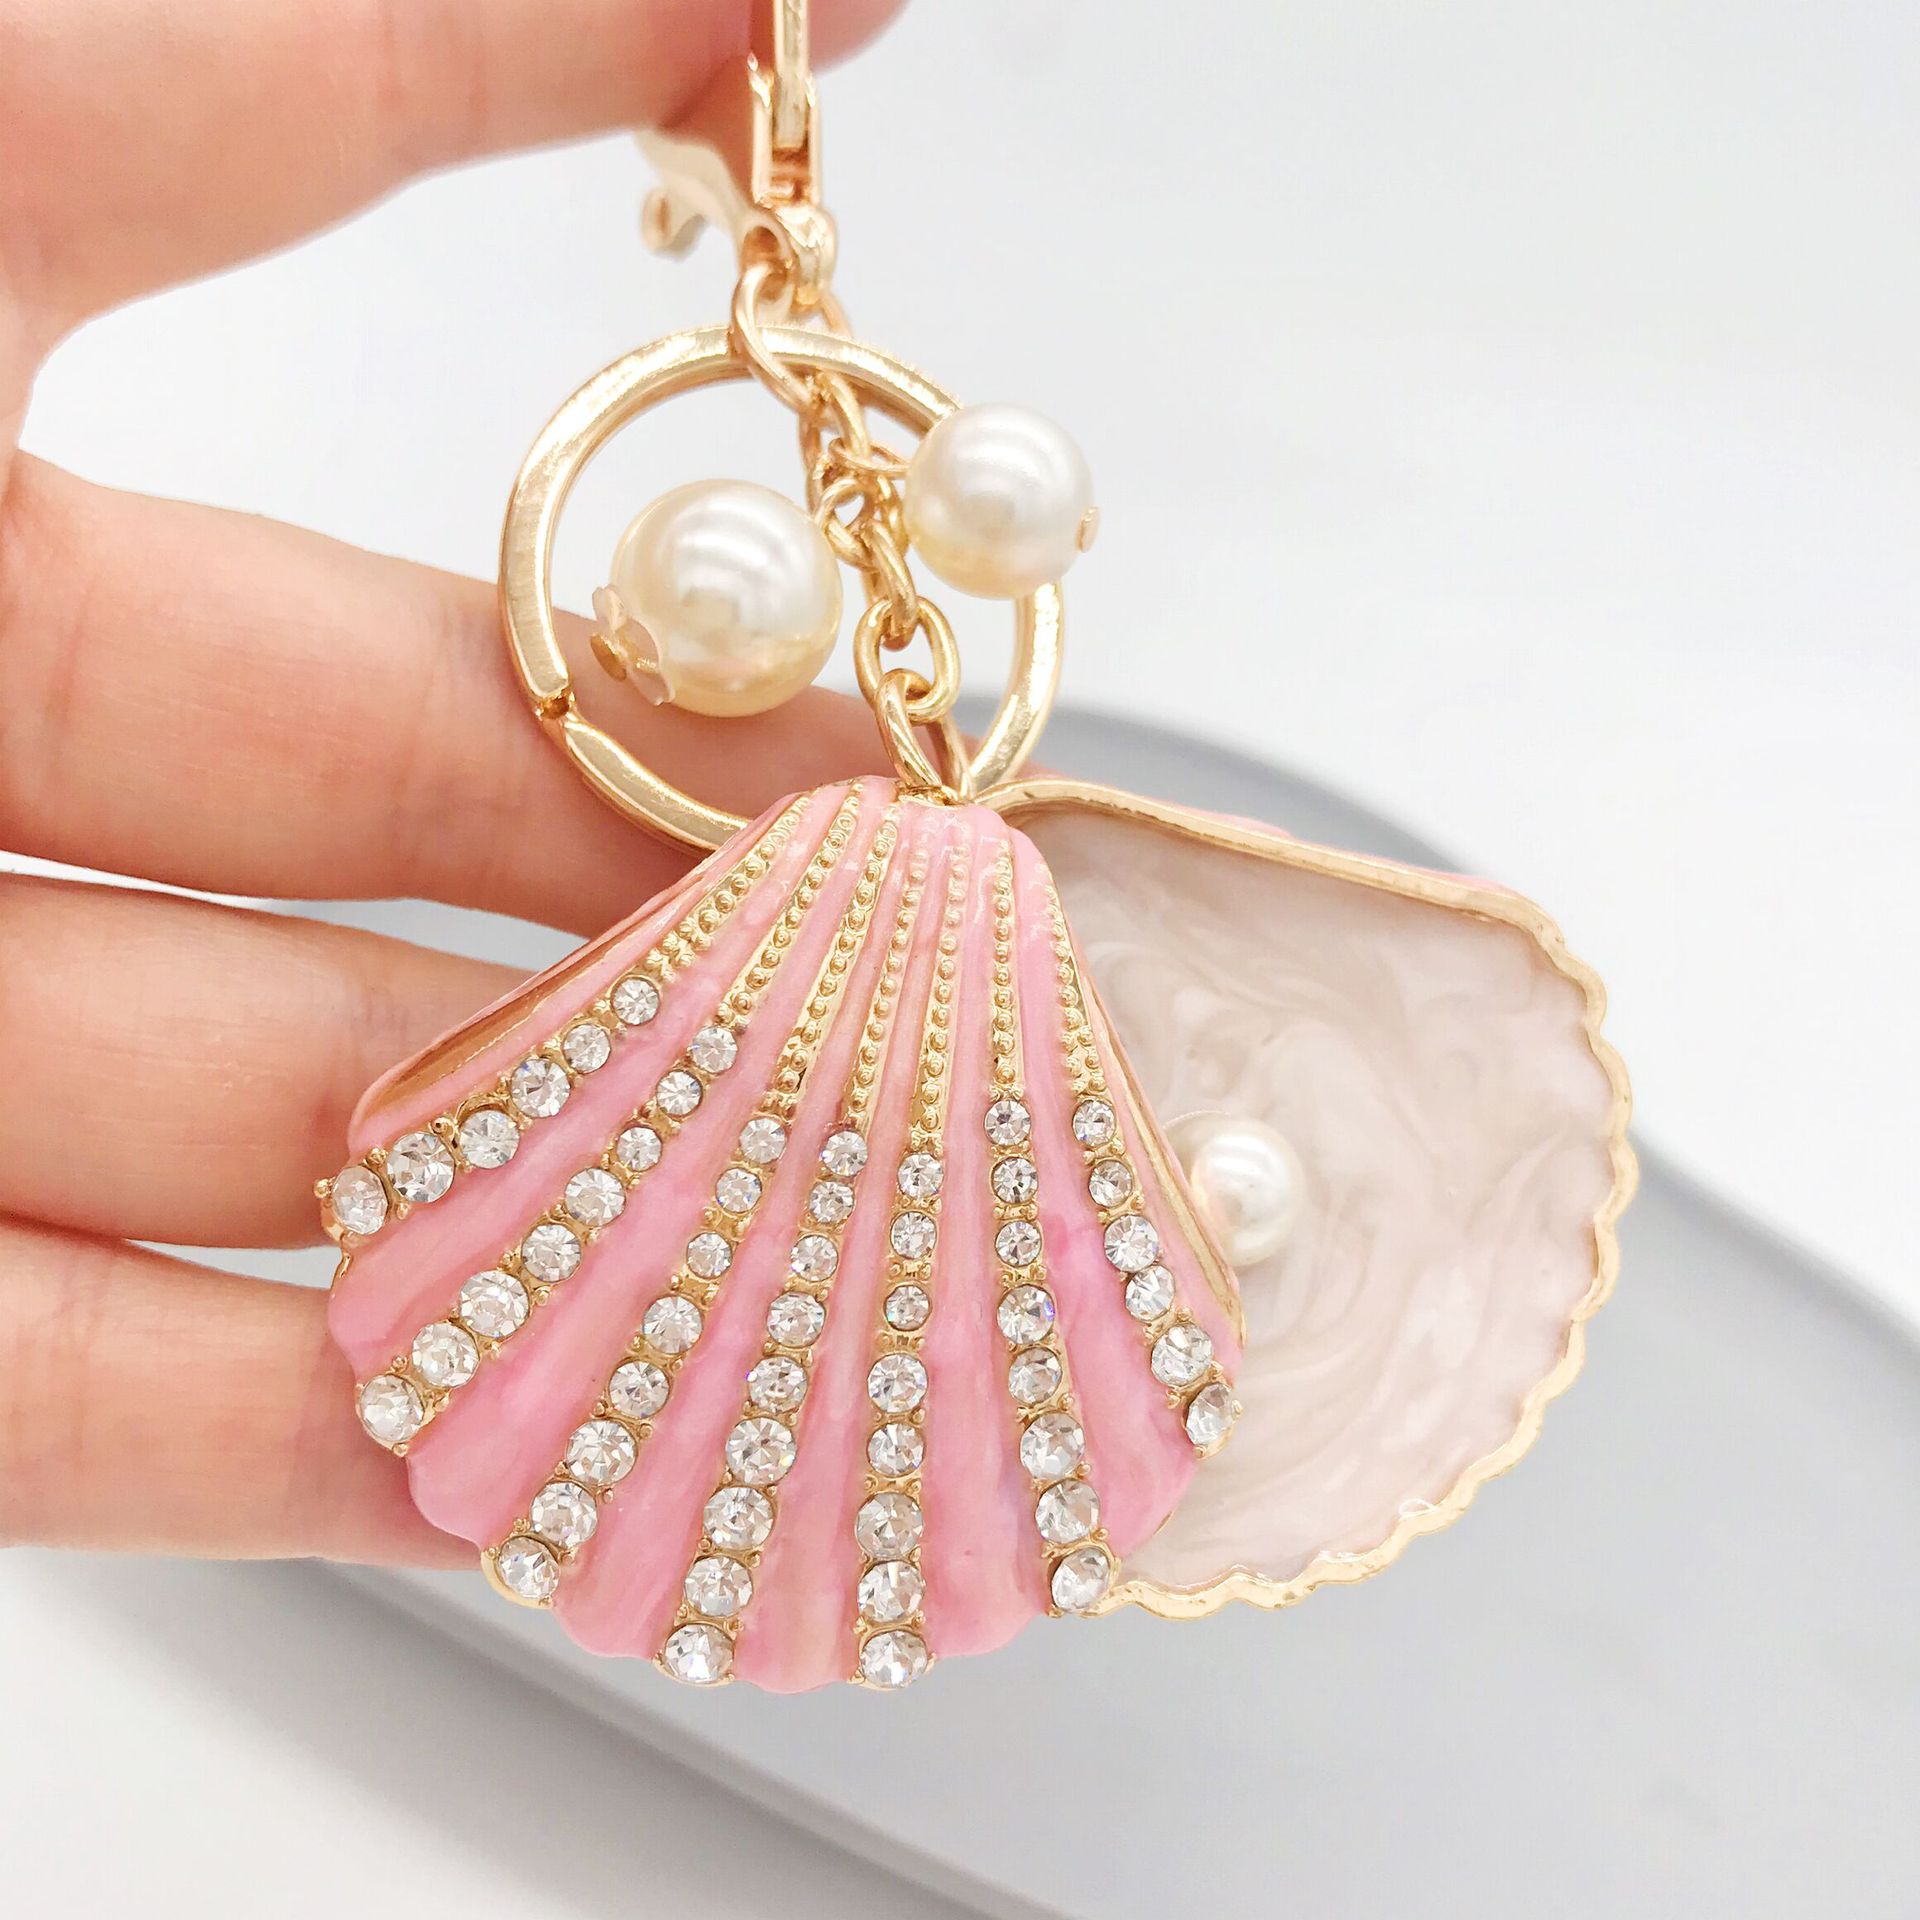 

Shell Shape Keychain for Women Purse Party Favor Charms for Handbags Crystal Pendant with Key Ring 1221823